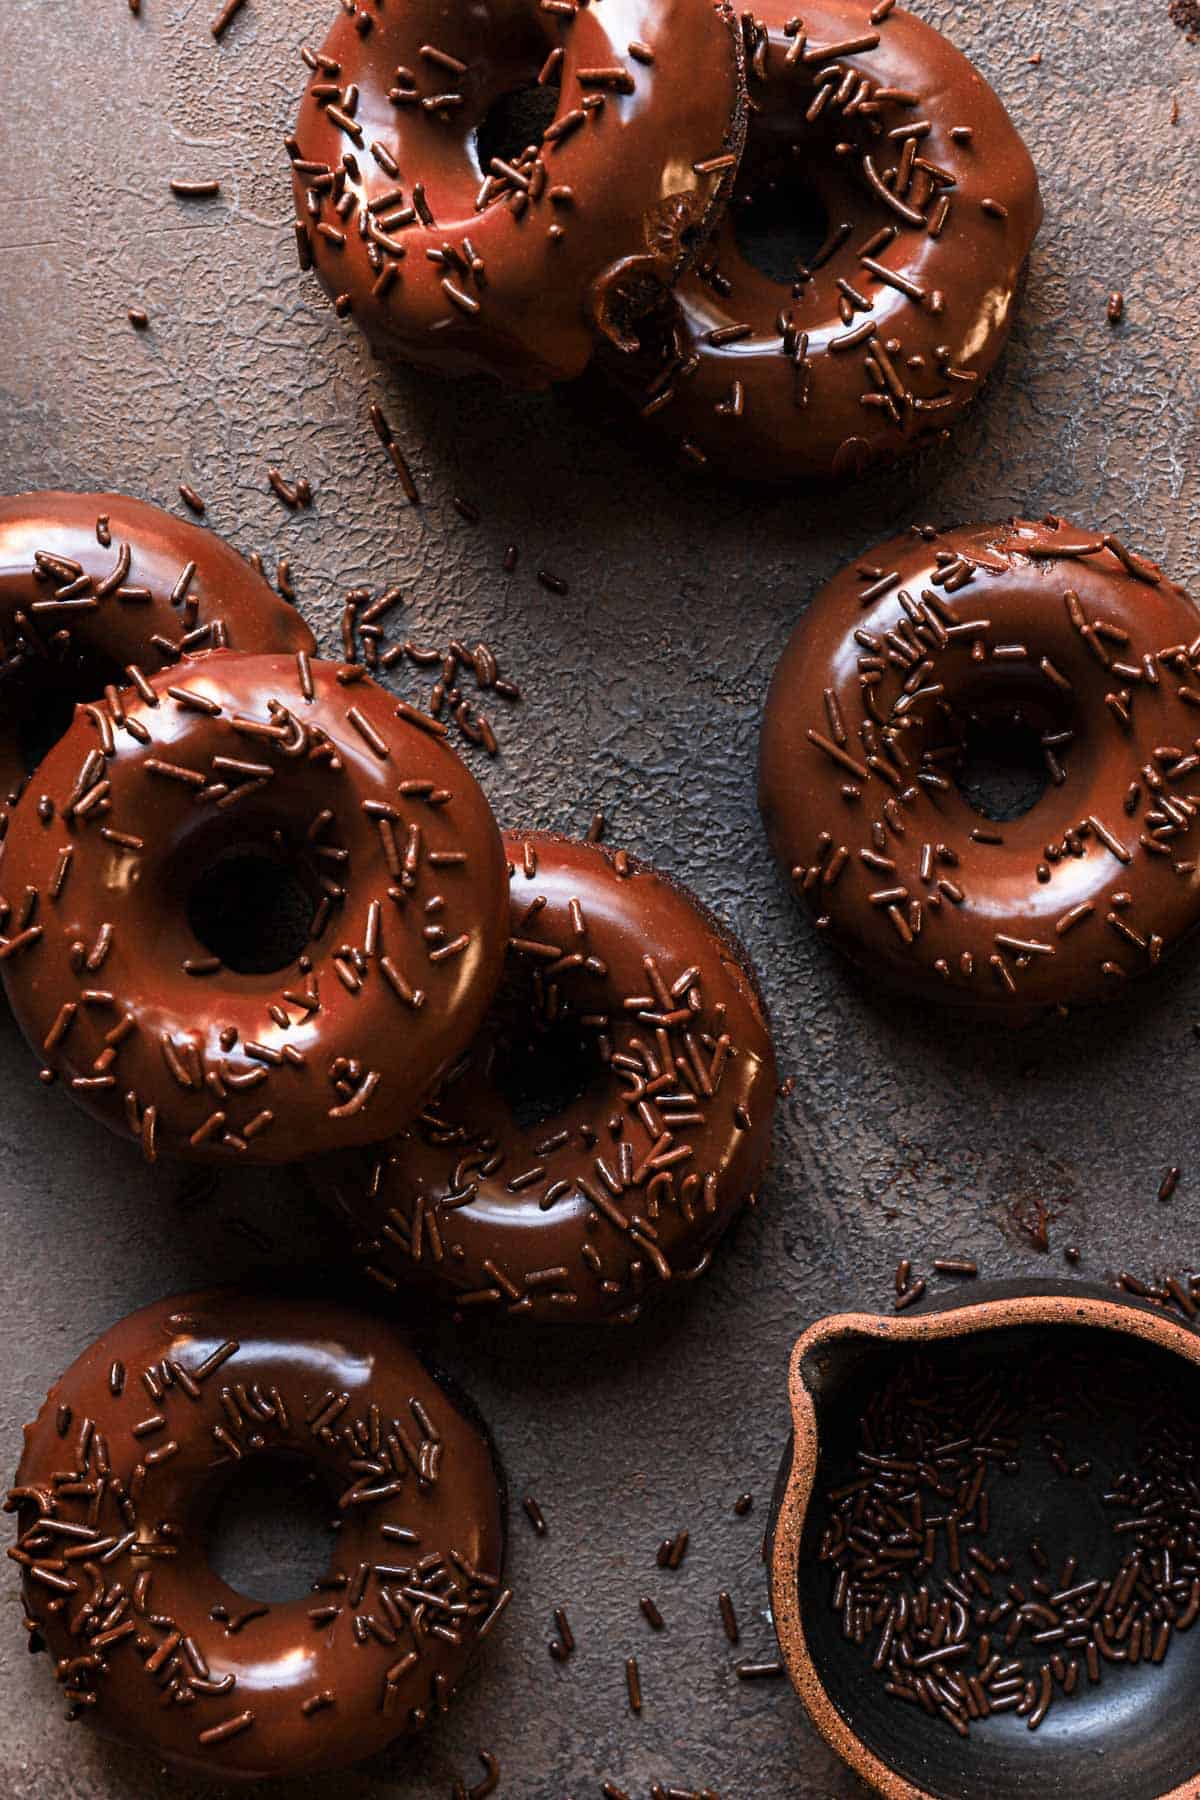 Baked donuts with chocolate glazed and sprinkles.